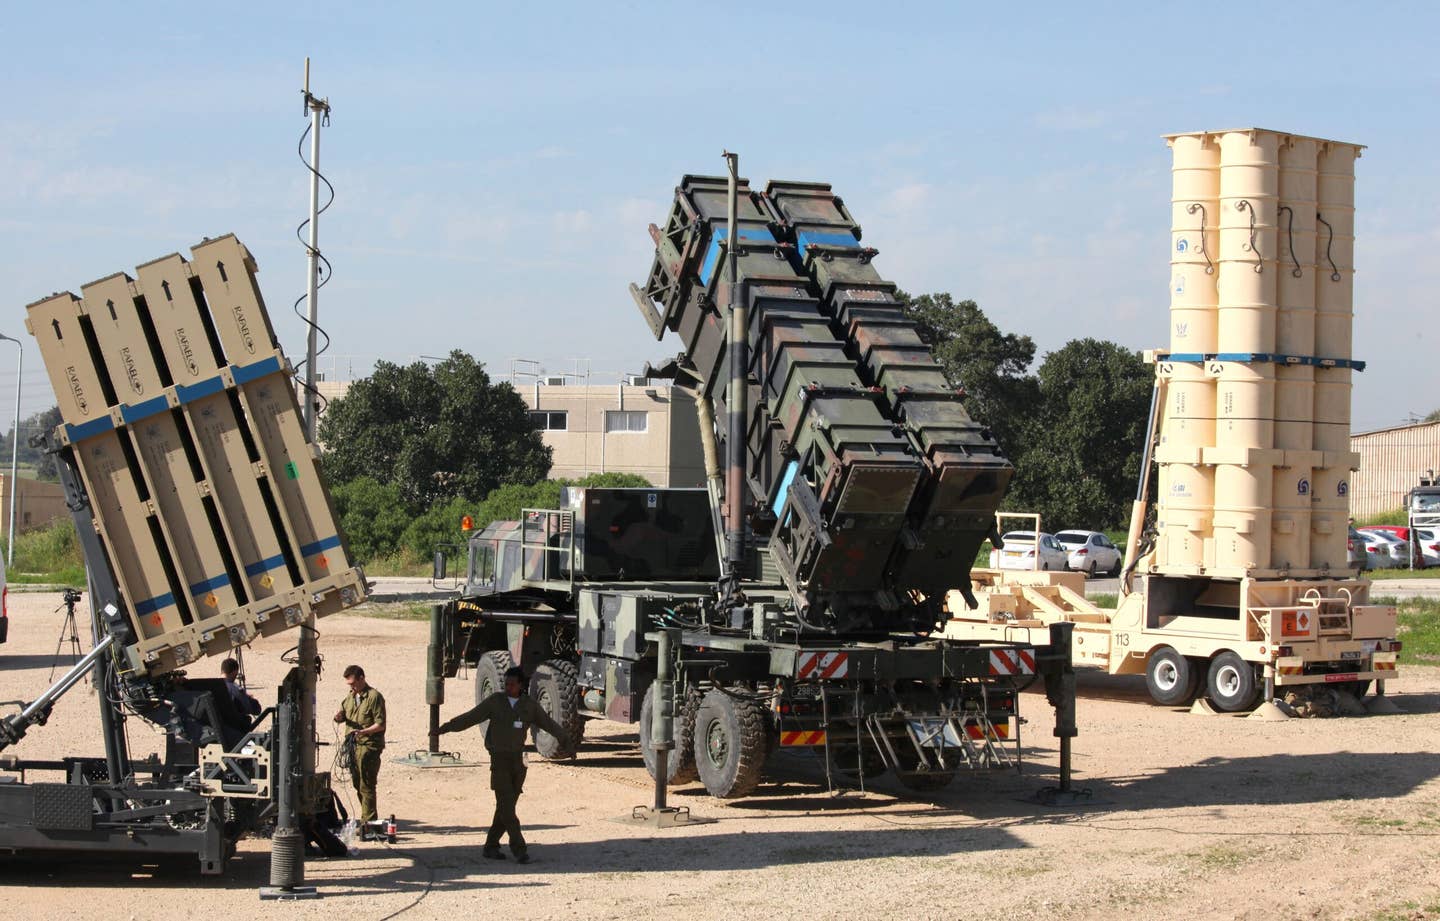 An Israeli Iron Dome air defense system (left), a MIM-104 Patriot (center), and an Arrow 3 anti-ballistic missile system (right) during the U.S.-Israeli Exercise Juniper Cobra at Hatzor Israeli Air Base in central Israel, on February 25, 2016. <em>Photo by GIL COHEN-MAGEN/AFP via Getty Images</em>